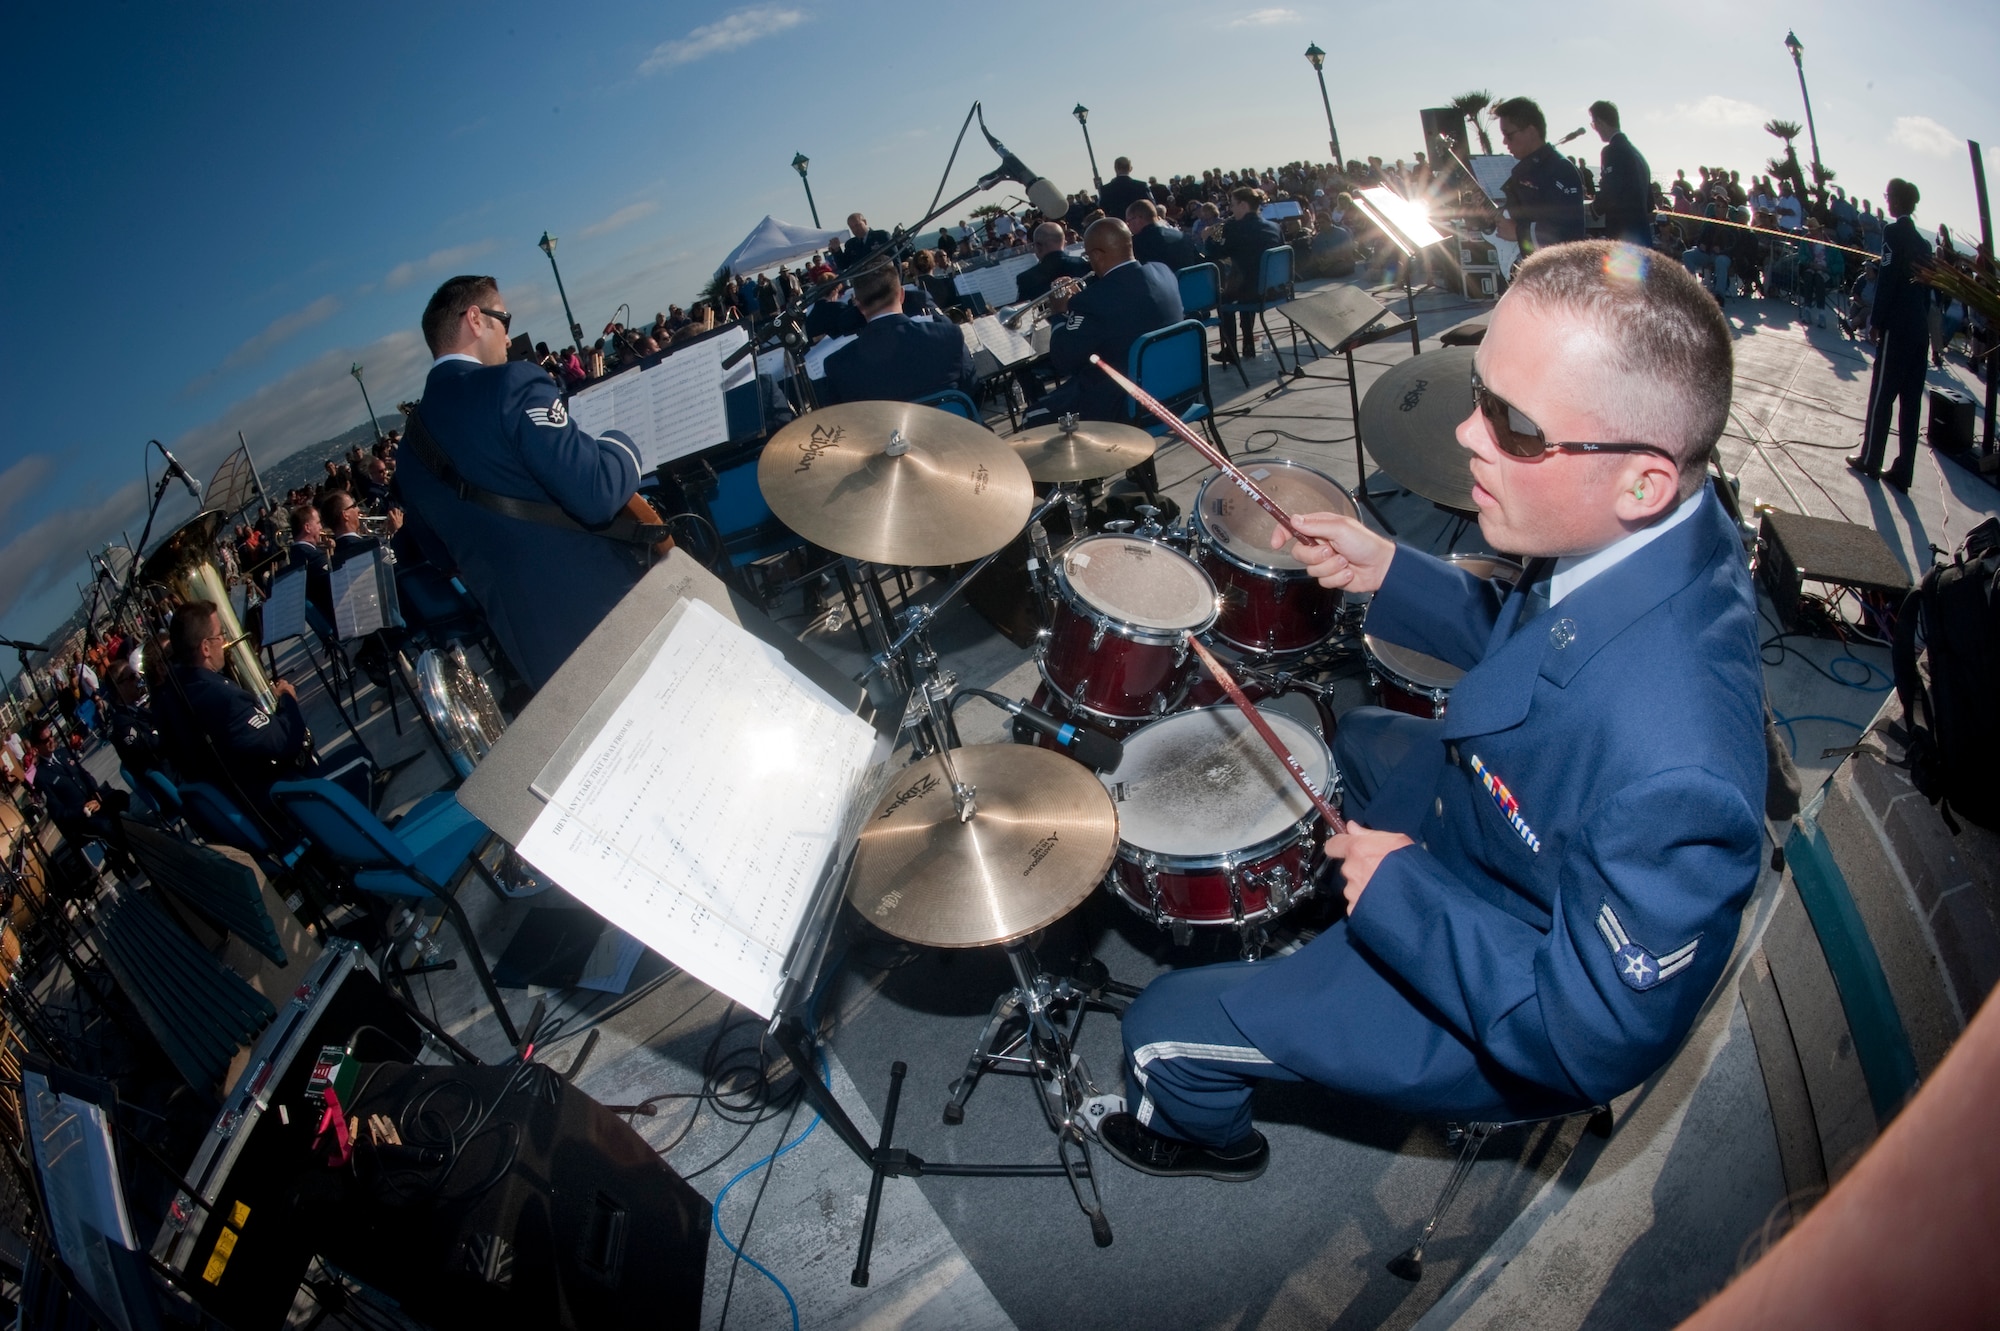 U.S. Air Force Airman 1st Class Simon Thomsen, 531st Air National Guard Band of the Gulf Coast performs at Redondo Beach Pier, Rendondo Beach, Calif., July 16, 2011. Thomsen, a percussionist, performs with the combined bands of the 531st and 562nd Air National Guard Band of the Southwest during their 2011 Southwest tour. (U.S. Air Force Photo by Tech. Sgt. Charles Hatton)